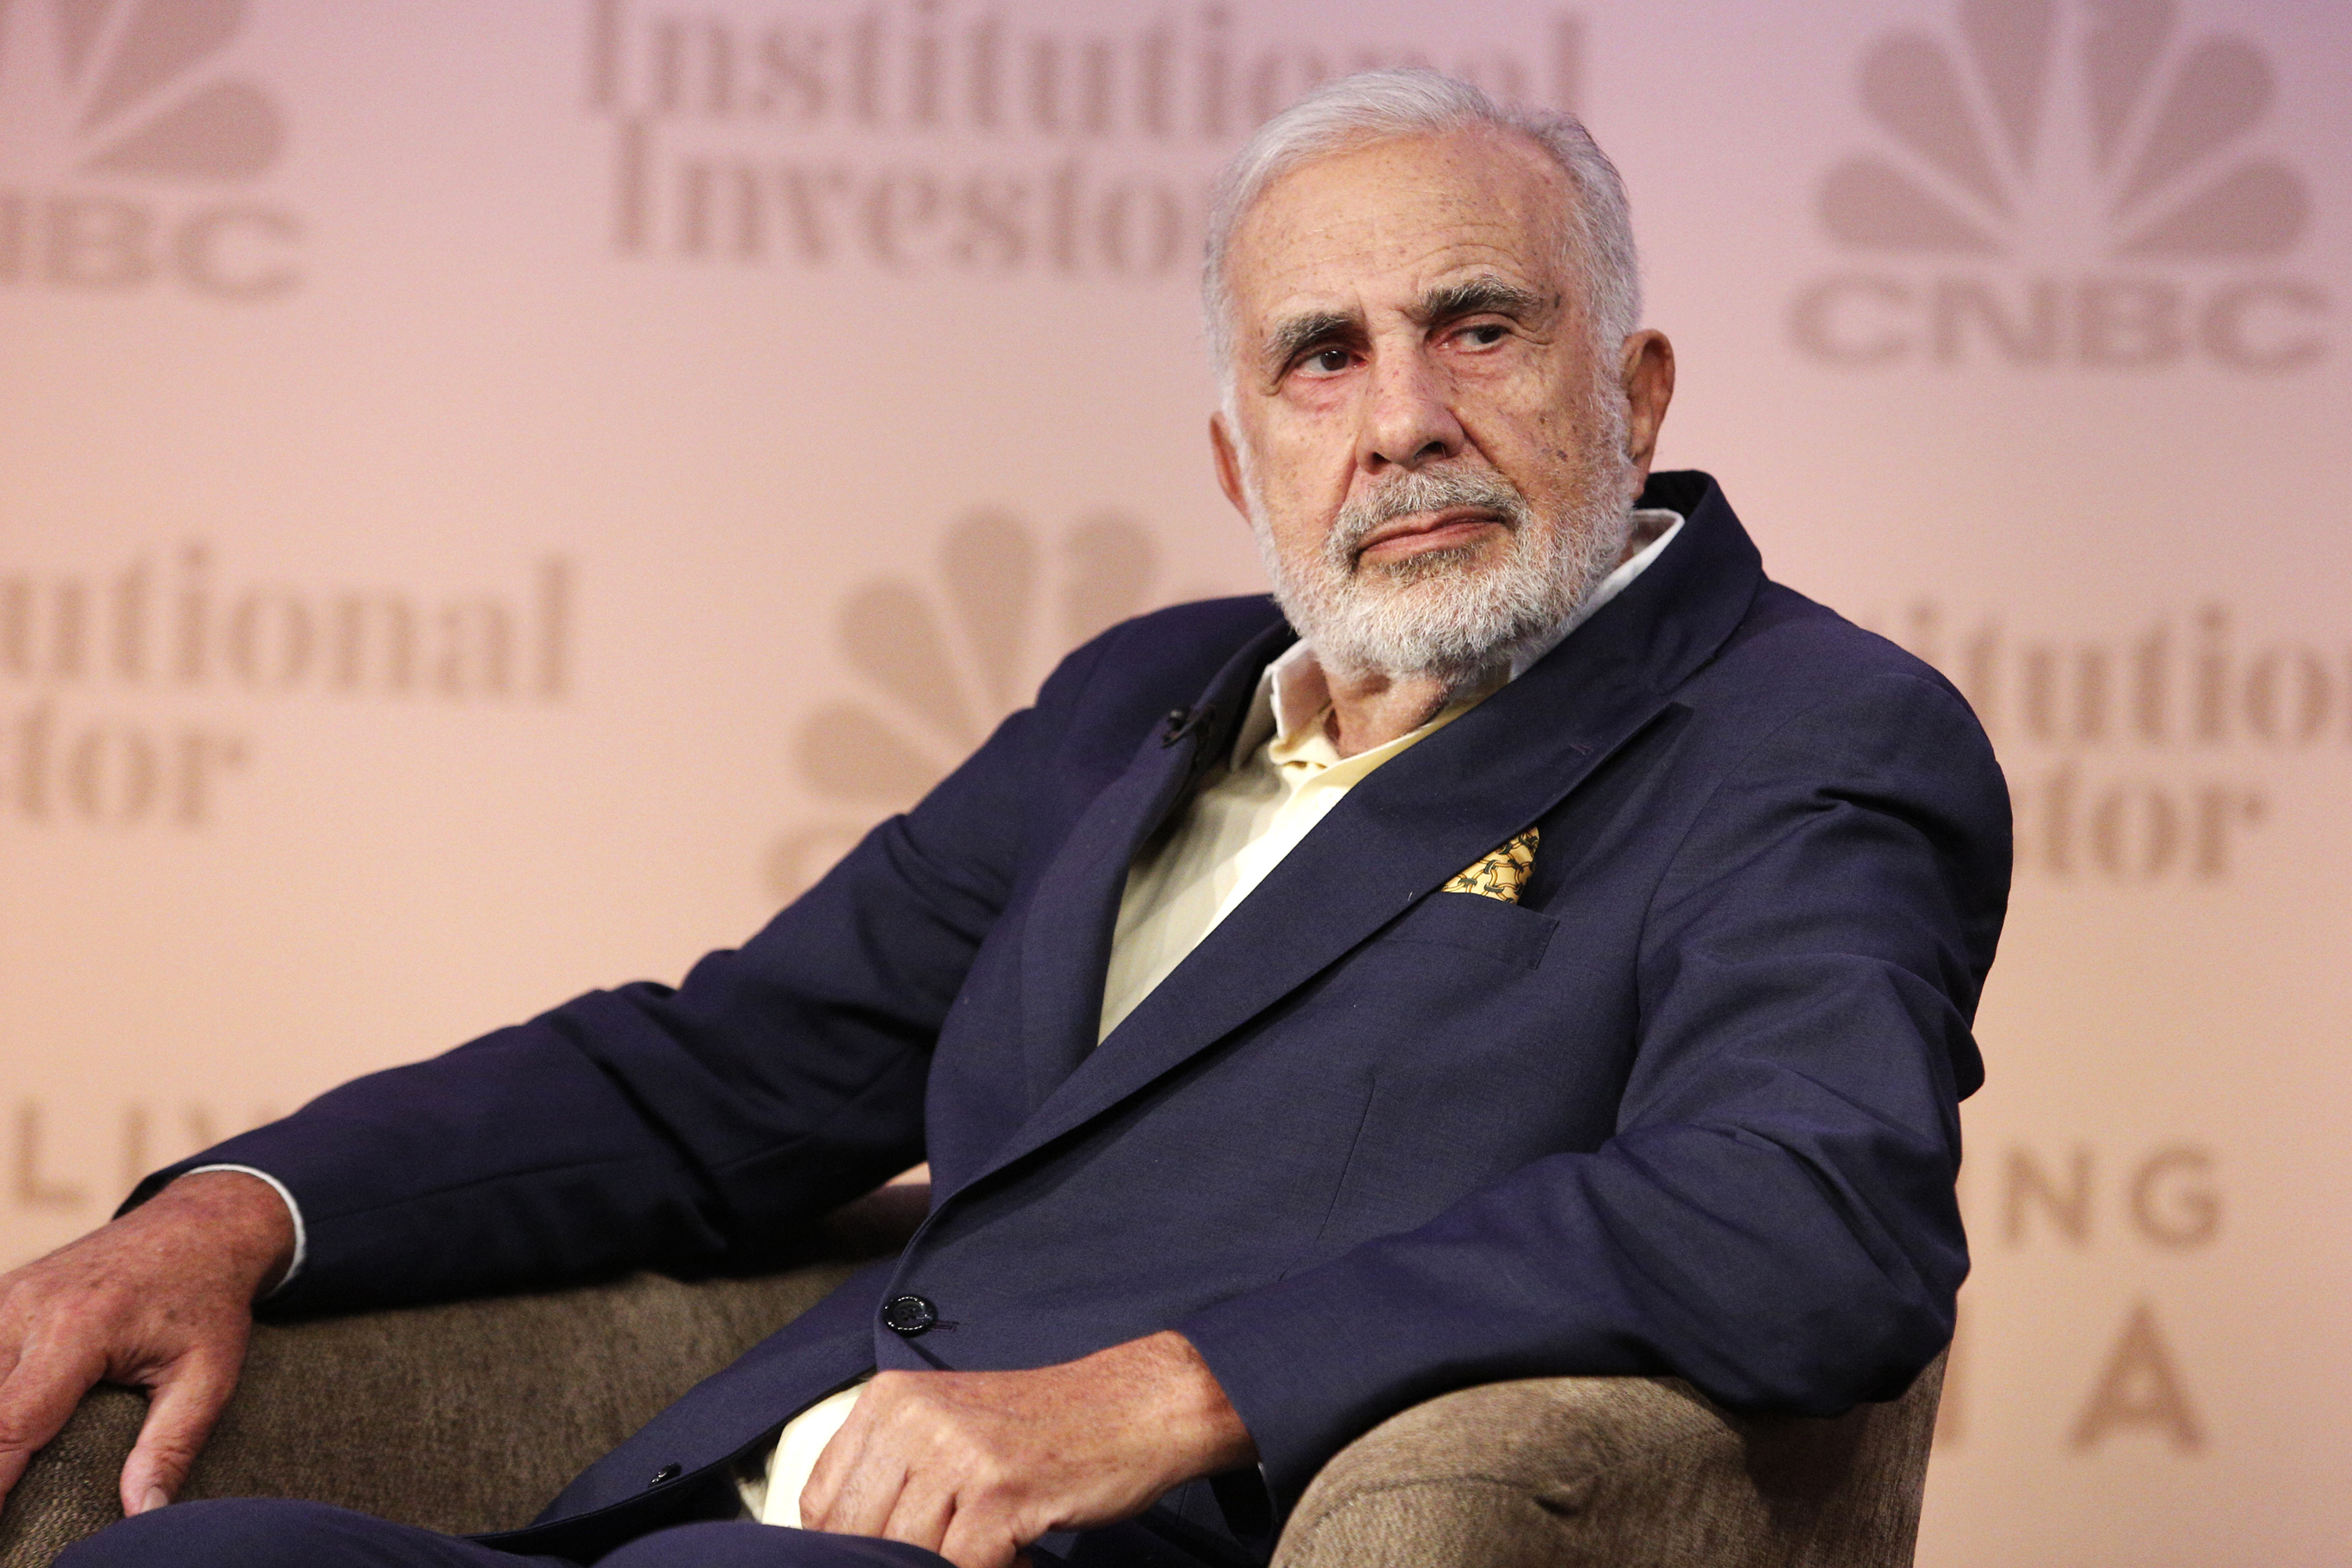 CNBC's Scott Wapner interviews Carl Icahn, Chairman, Icahn Enterprises at the CNBC Institutional Investor Delivering Alpha Conference in New York. (CNBC&mdash;NBCU Photo Bank via Getty Images)